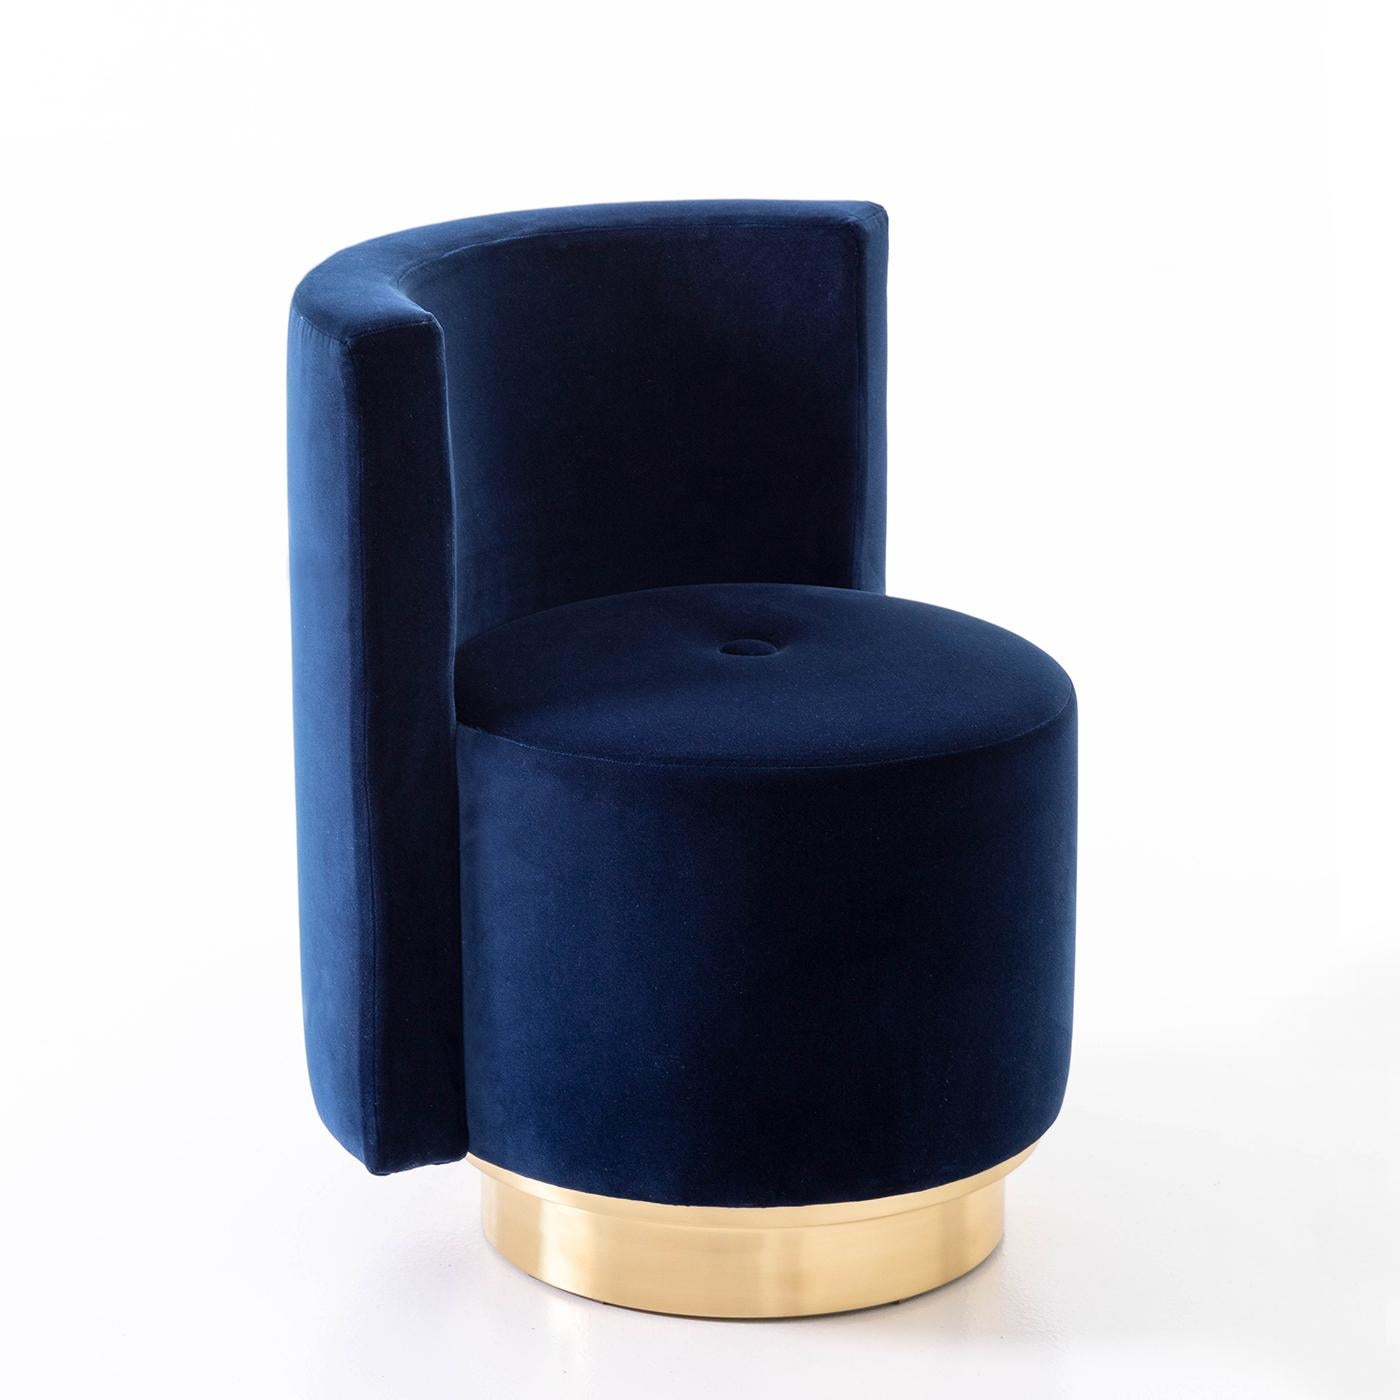 Chair Marckle with solid wood structure, upholstered
and covered with high quality deep blue velvet fabric.
Also available with other fabrics on request.